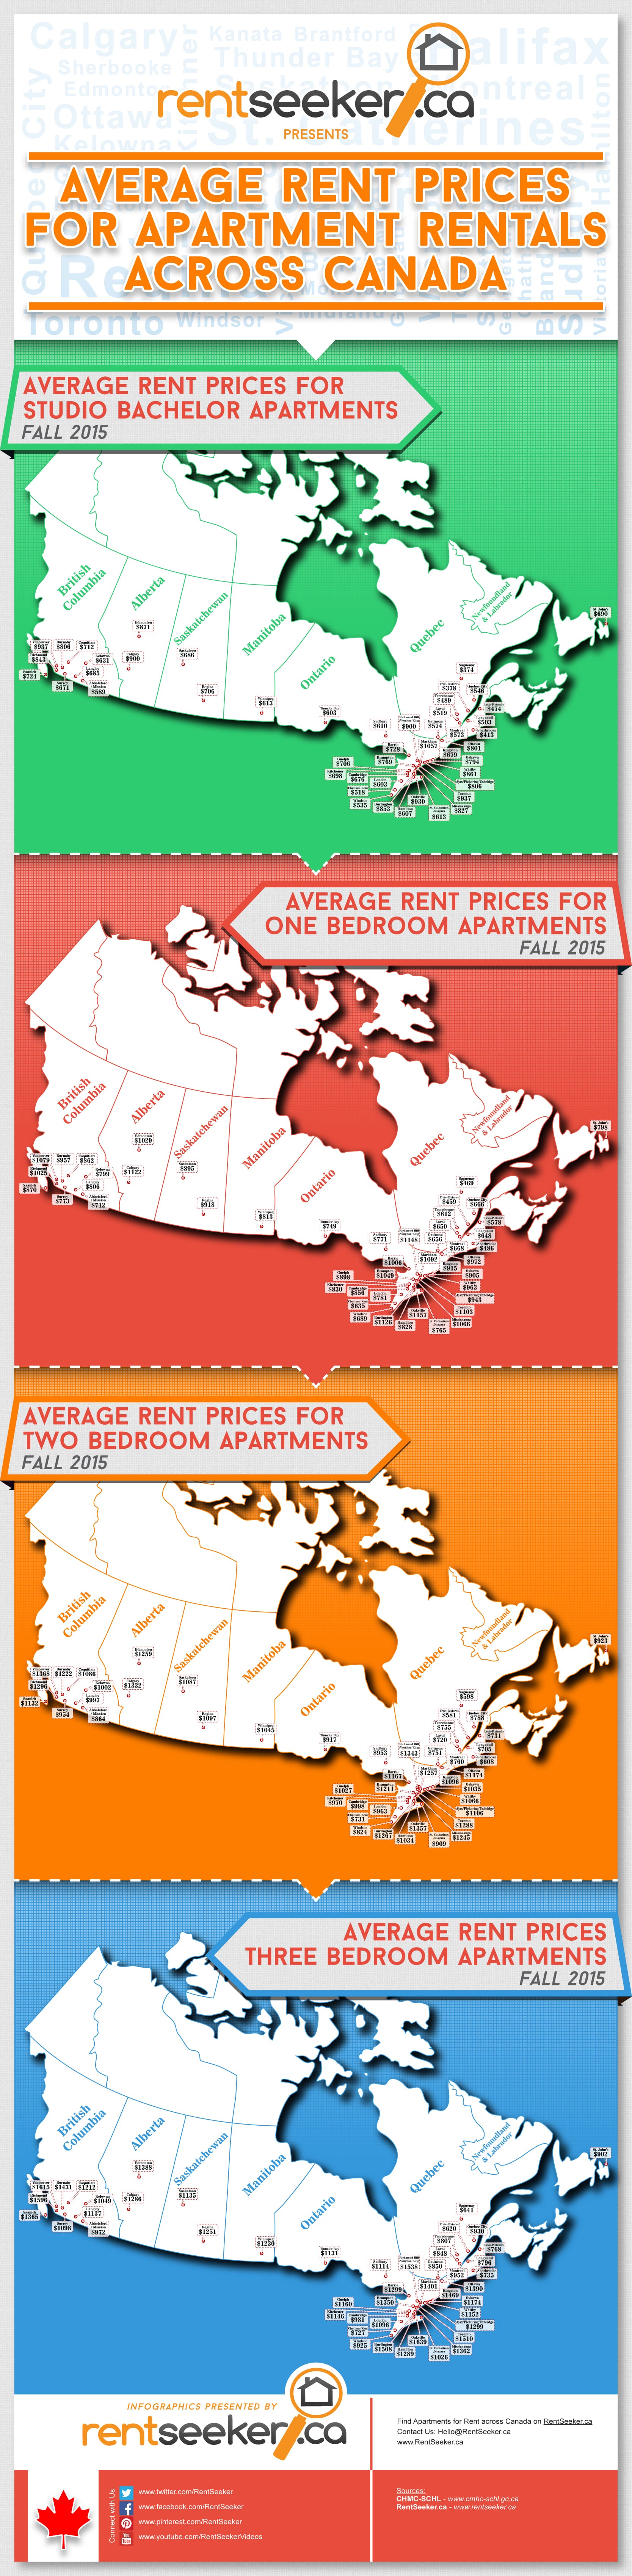 Average Rental Costs of Apartments across Canada for Fall 2015